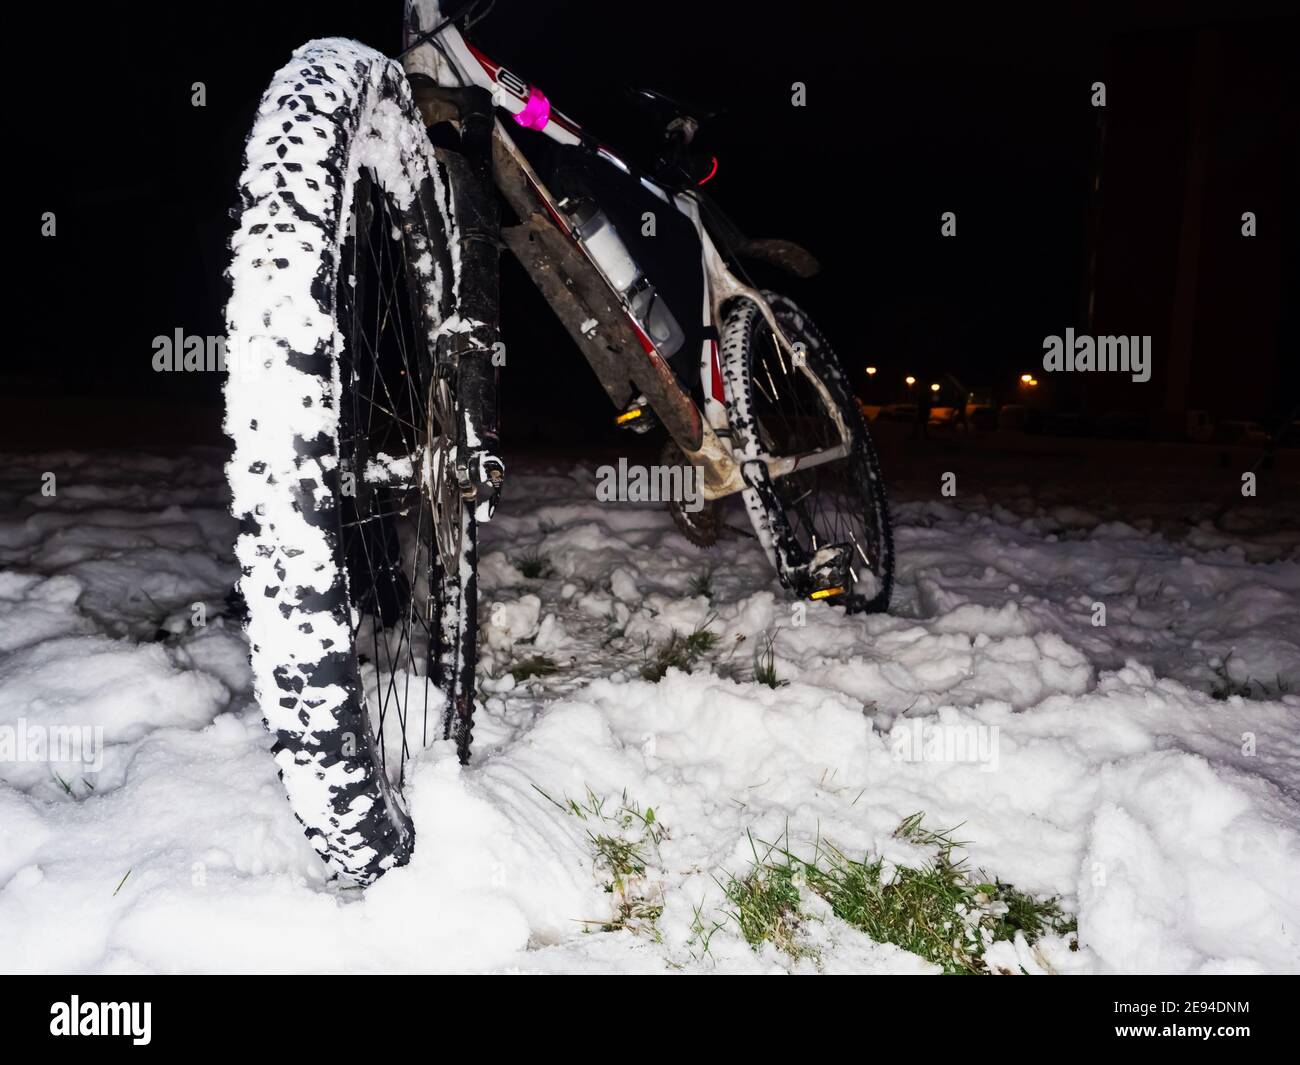 Mtb riding in snow.  Extreme fun. Front wheel with large grips on fat tyre. Winter adventure and extreme biking. Stock Photo